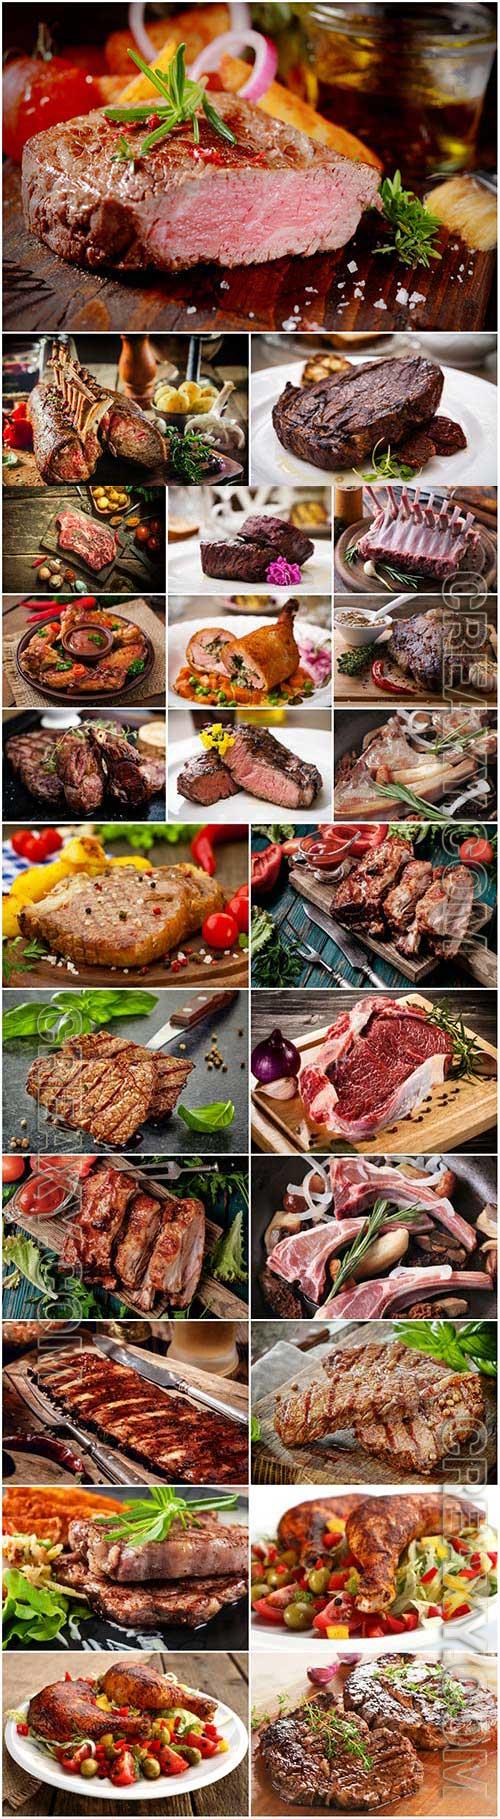 Grilled meat, fresh meat stock photo